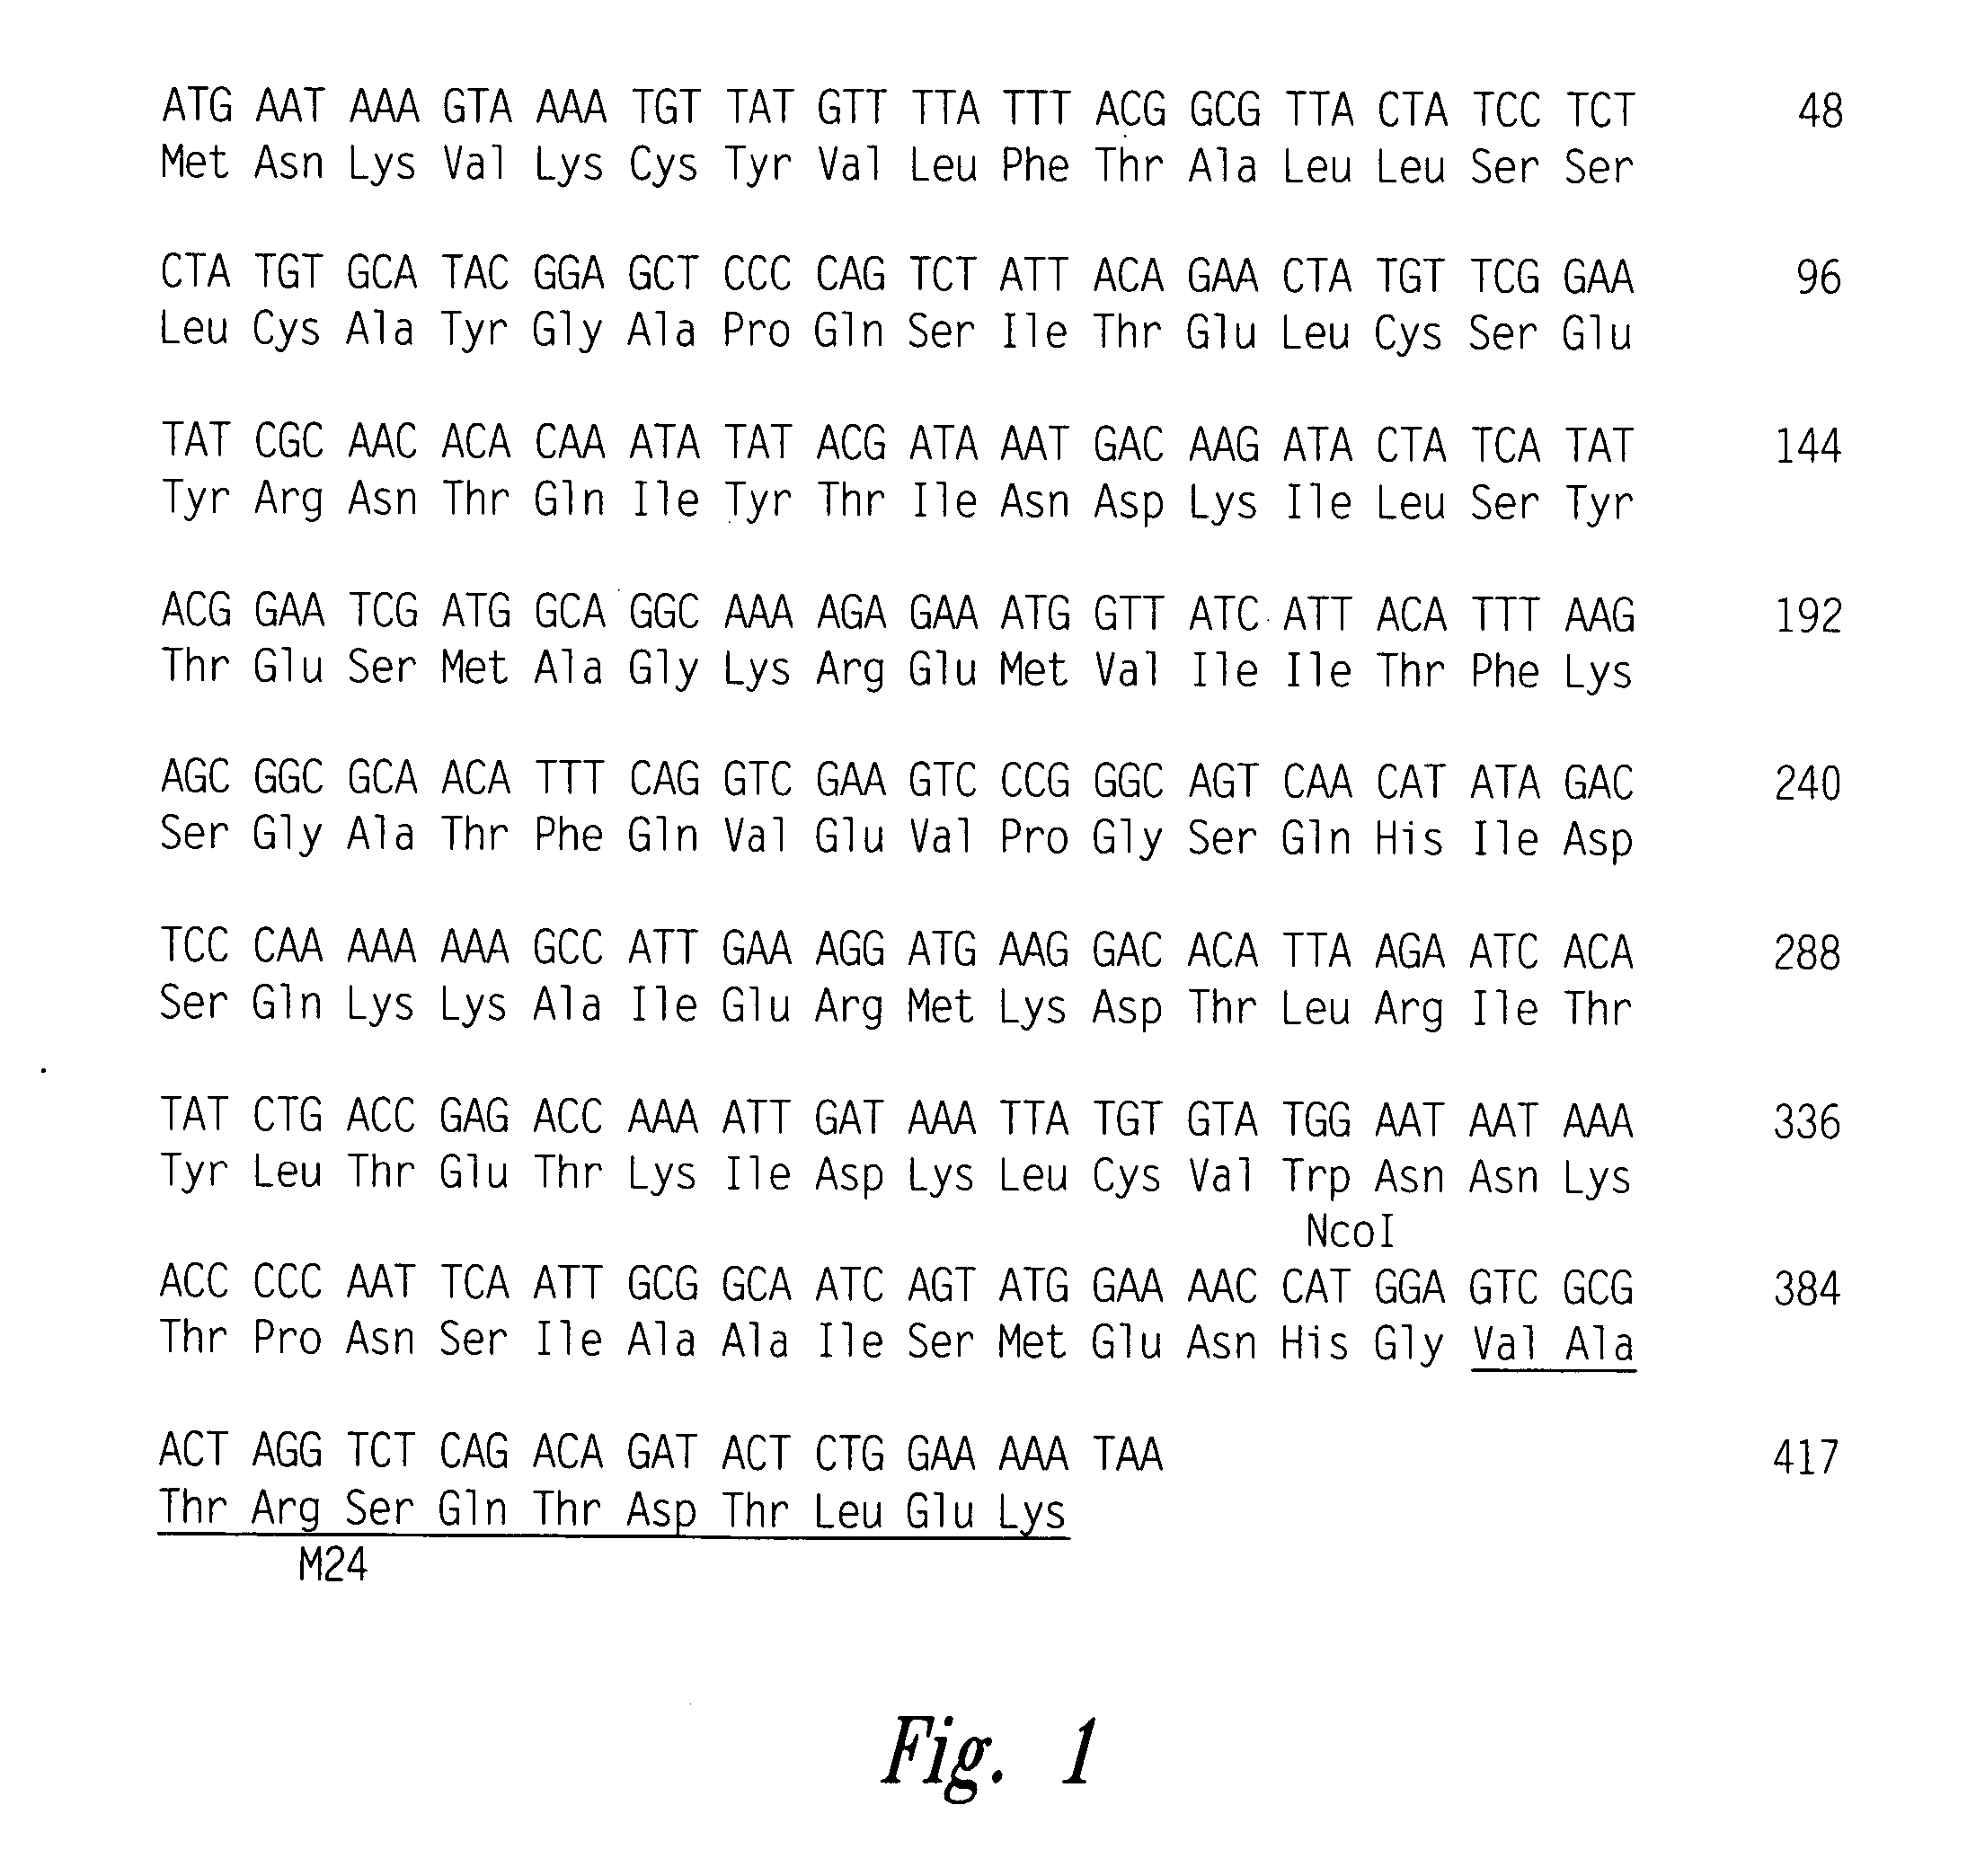 Antigen of hybrid M protein and carrier for group a streptococcal vaccine